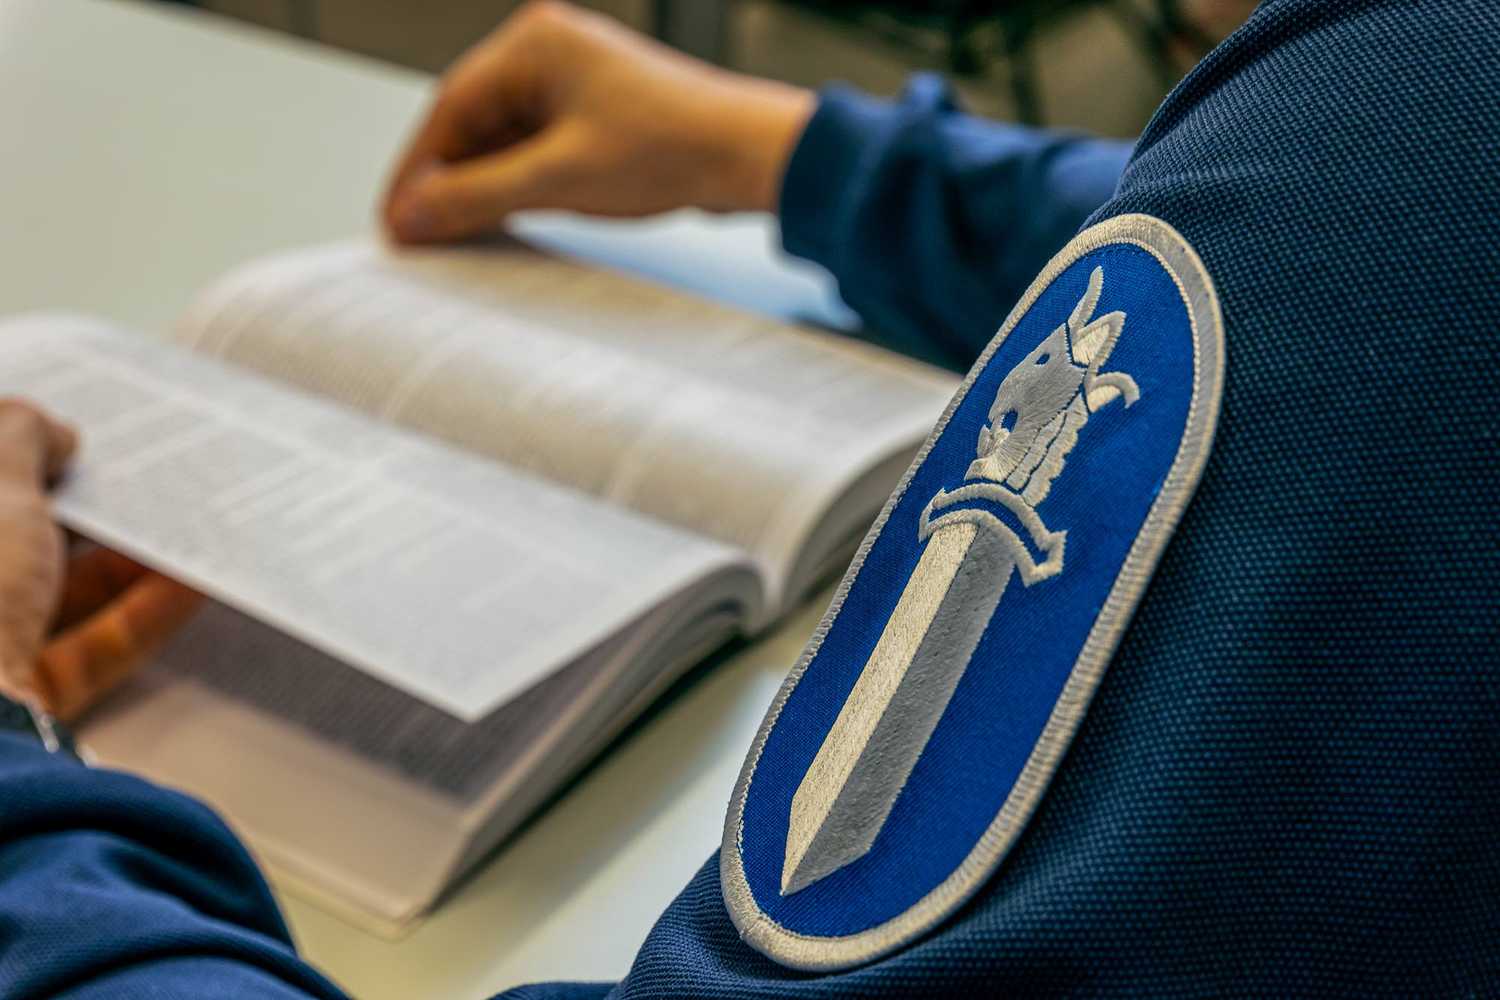 A policeman in uniform reading a law book. The police sword and lion emblem is visible on the sleeve in the foreground.